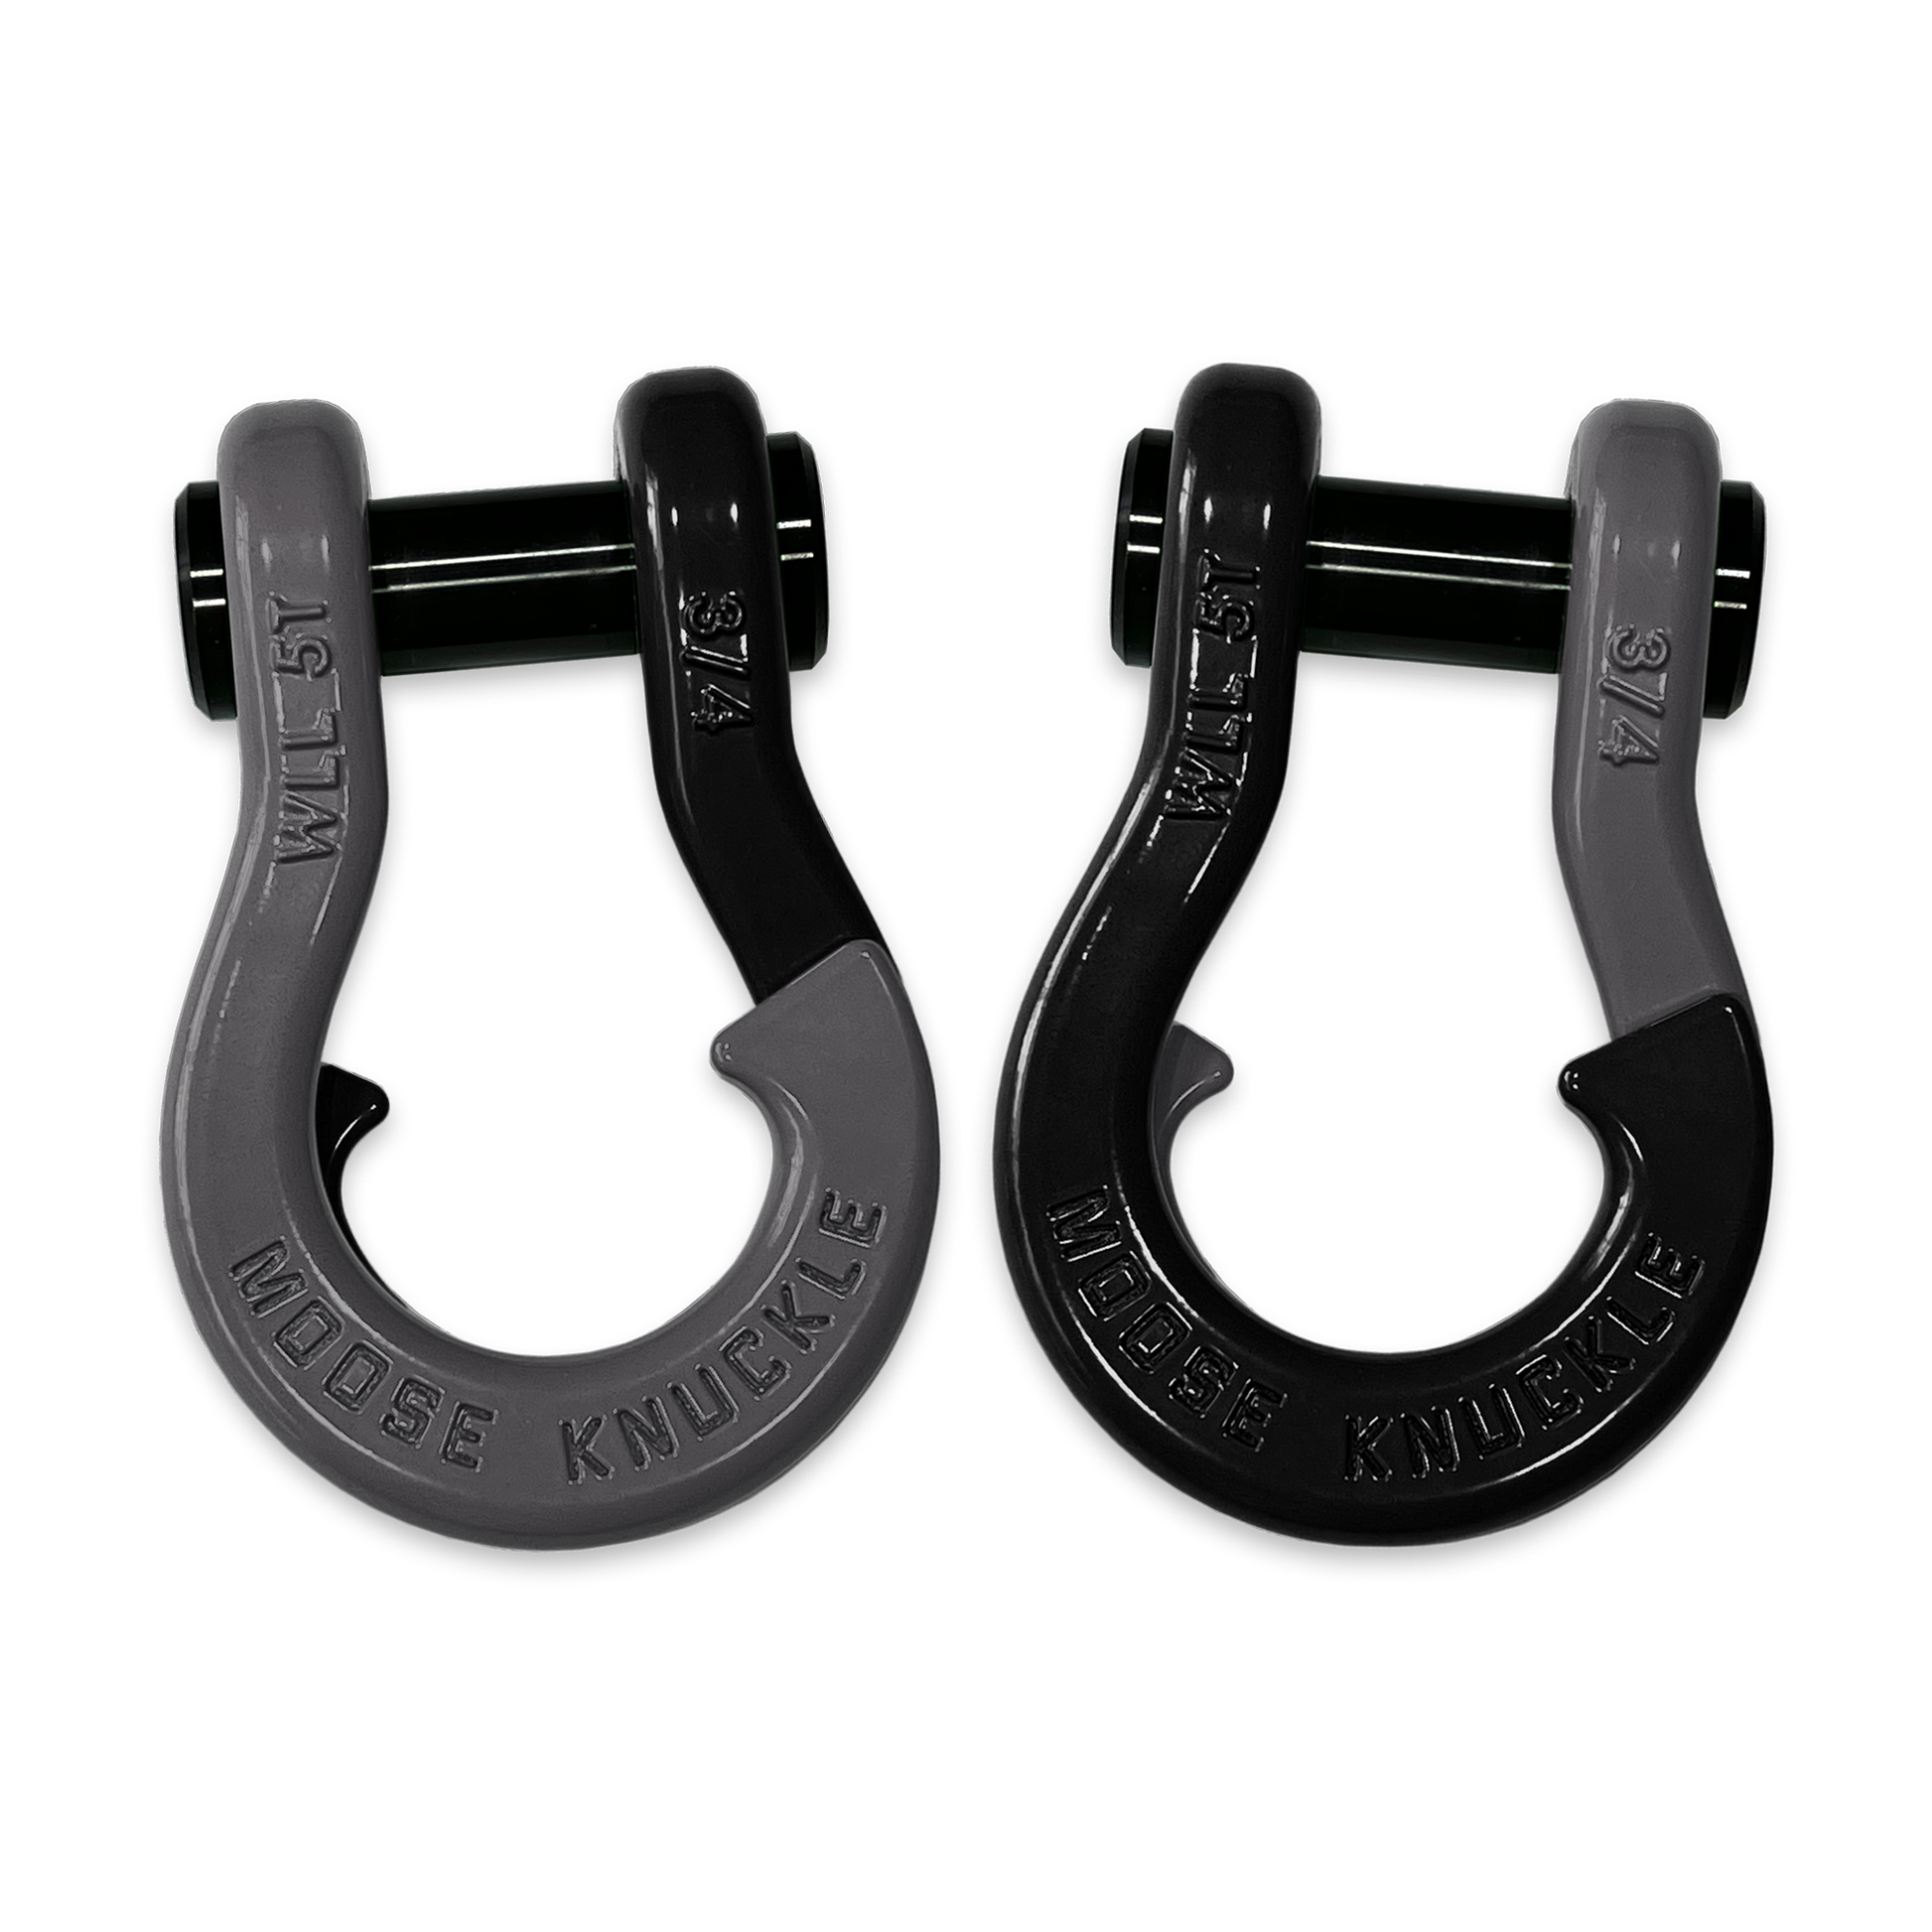 Moose Knuckle's Jowl Recovery Split Shackle 3/4 in Gun Gray and Black Hole Combo